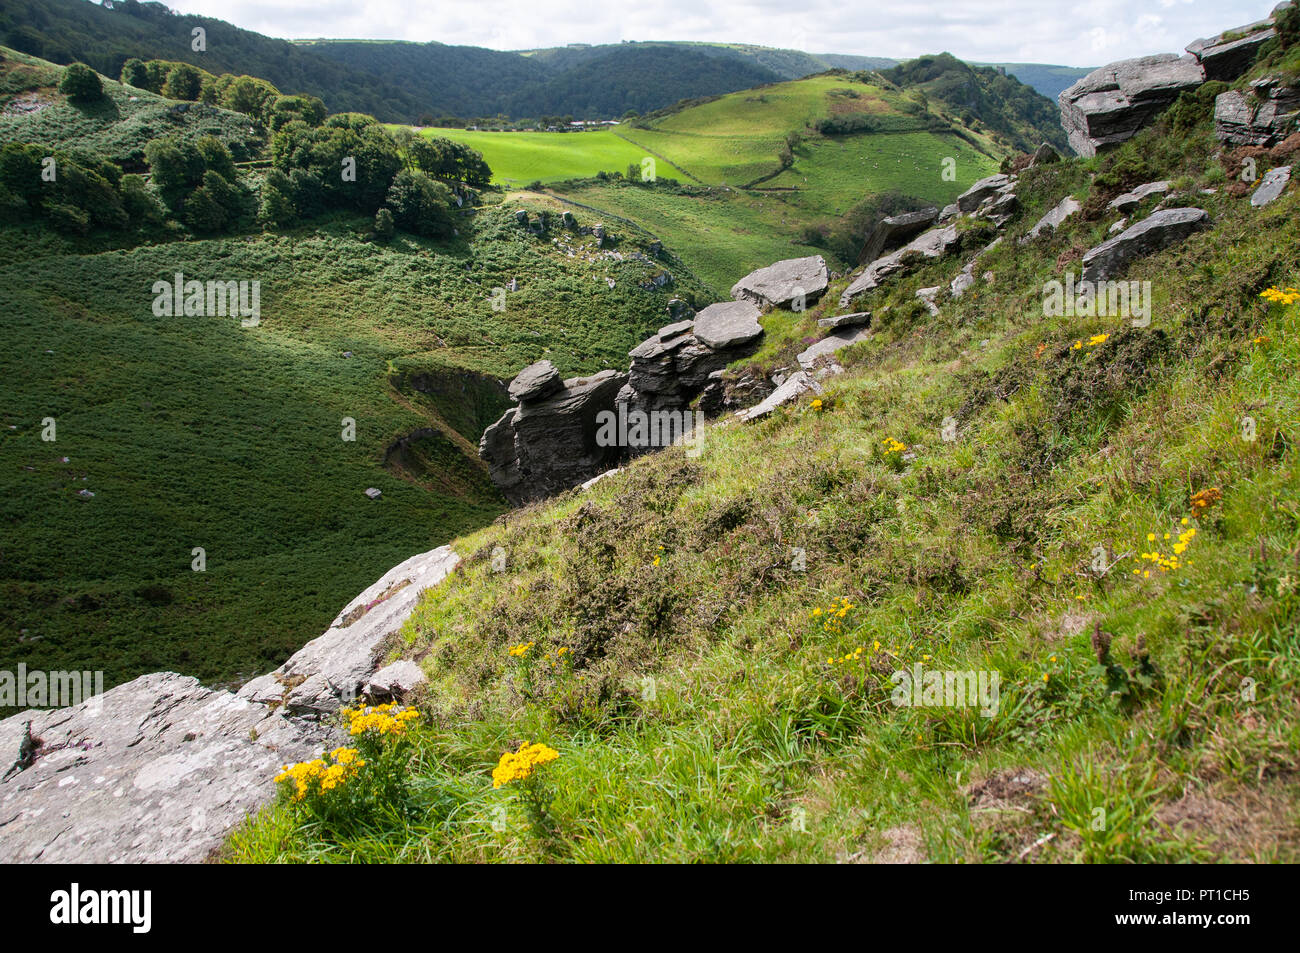 View down the steep slopes of a valley from high vantage point over rocky outcrops and fields and traditional stone walls. Stock Photo